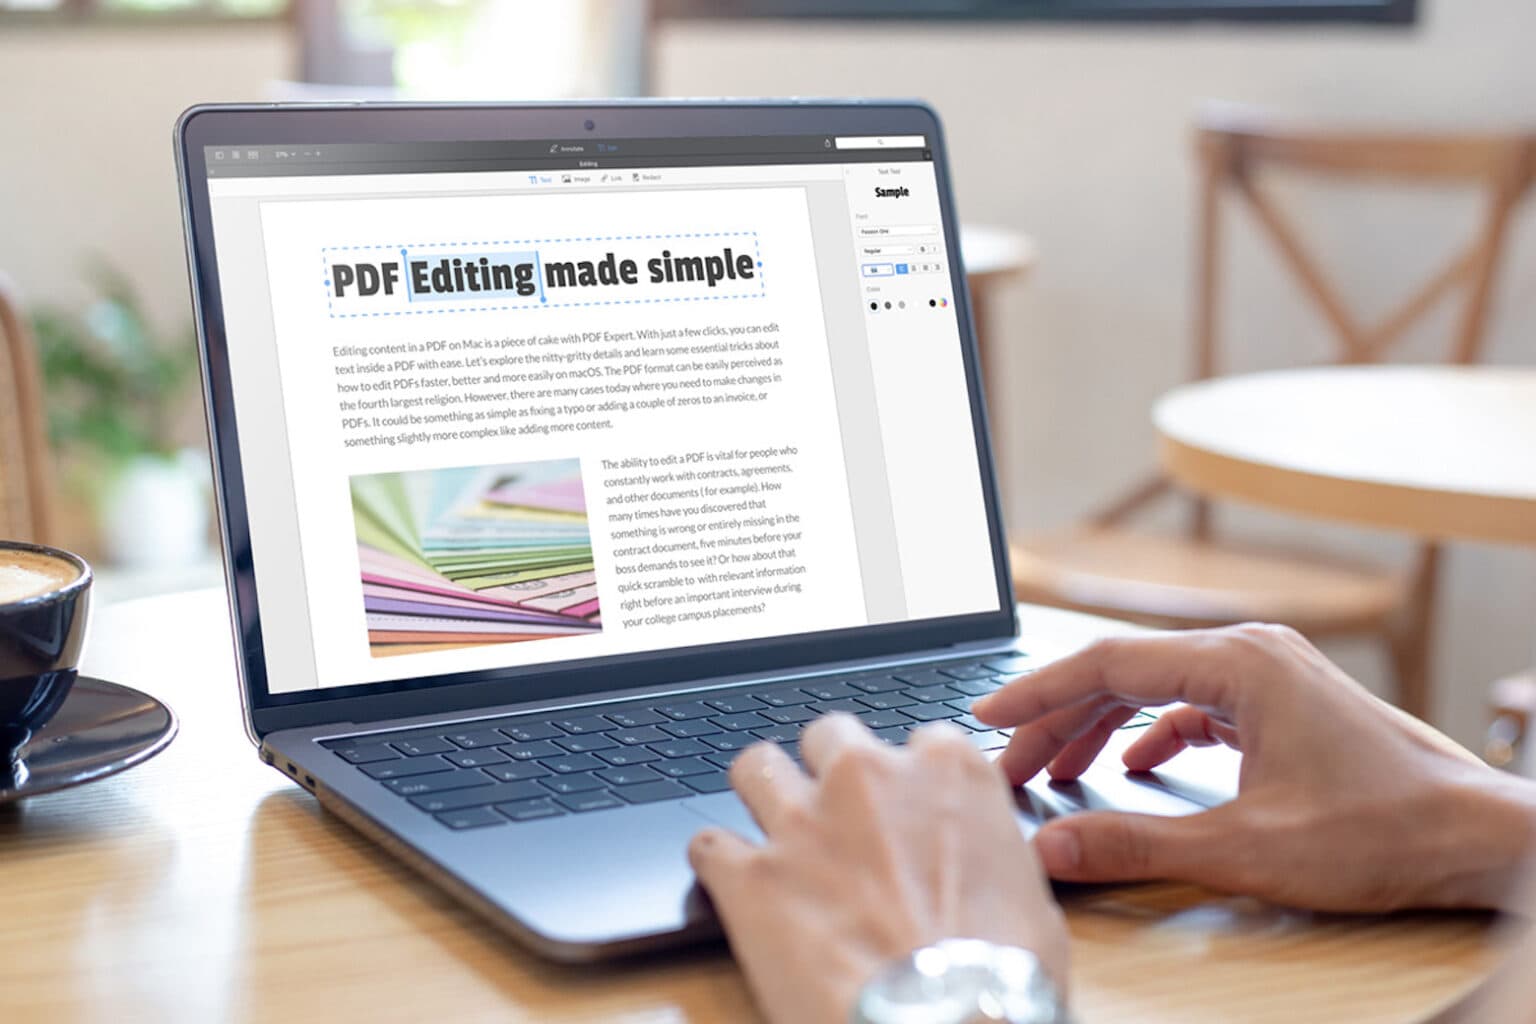 Edit PDFs with simplicity and ease with this award-winning software.